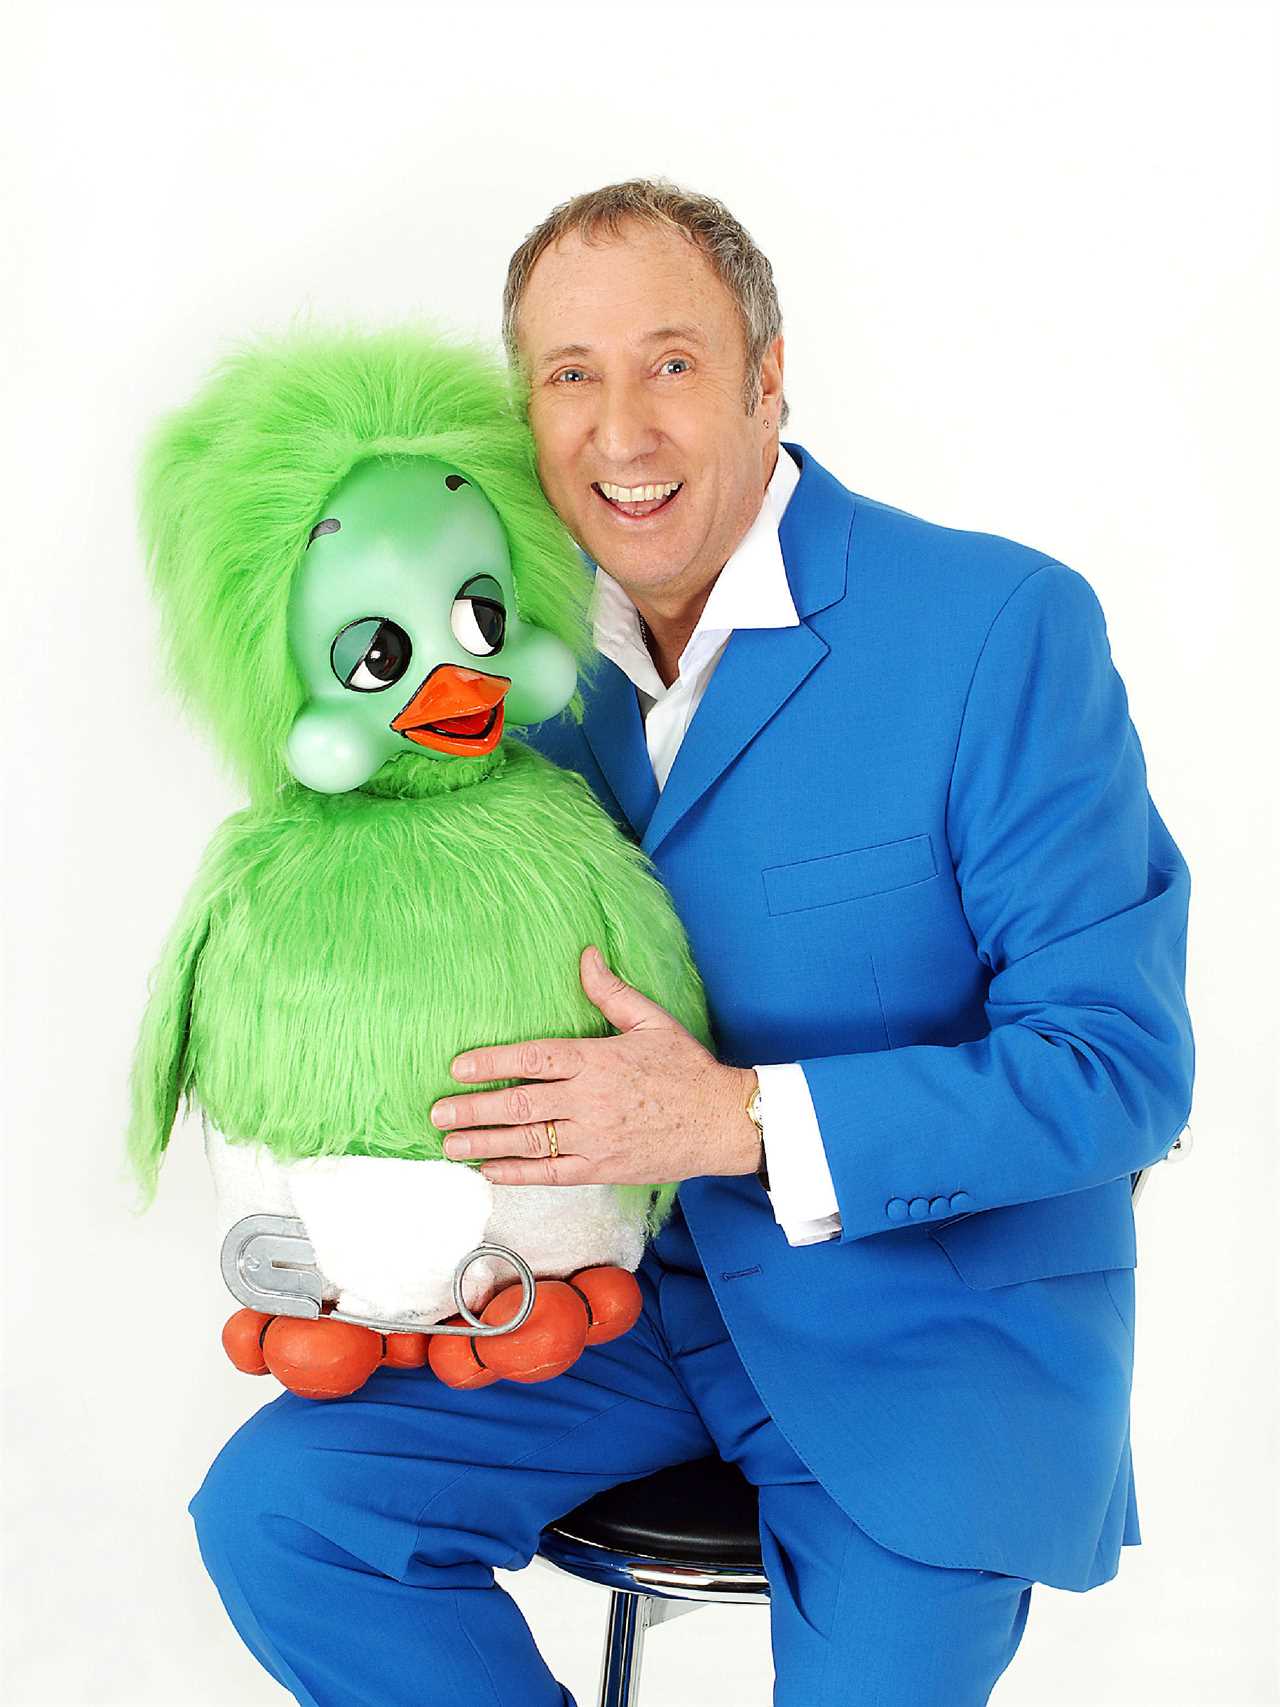 Keith Harris’ daughter Kitty lands role in Emmerdale as she launches acting career